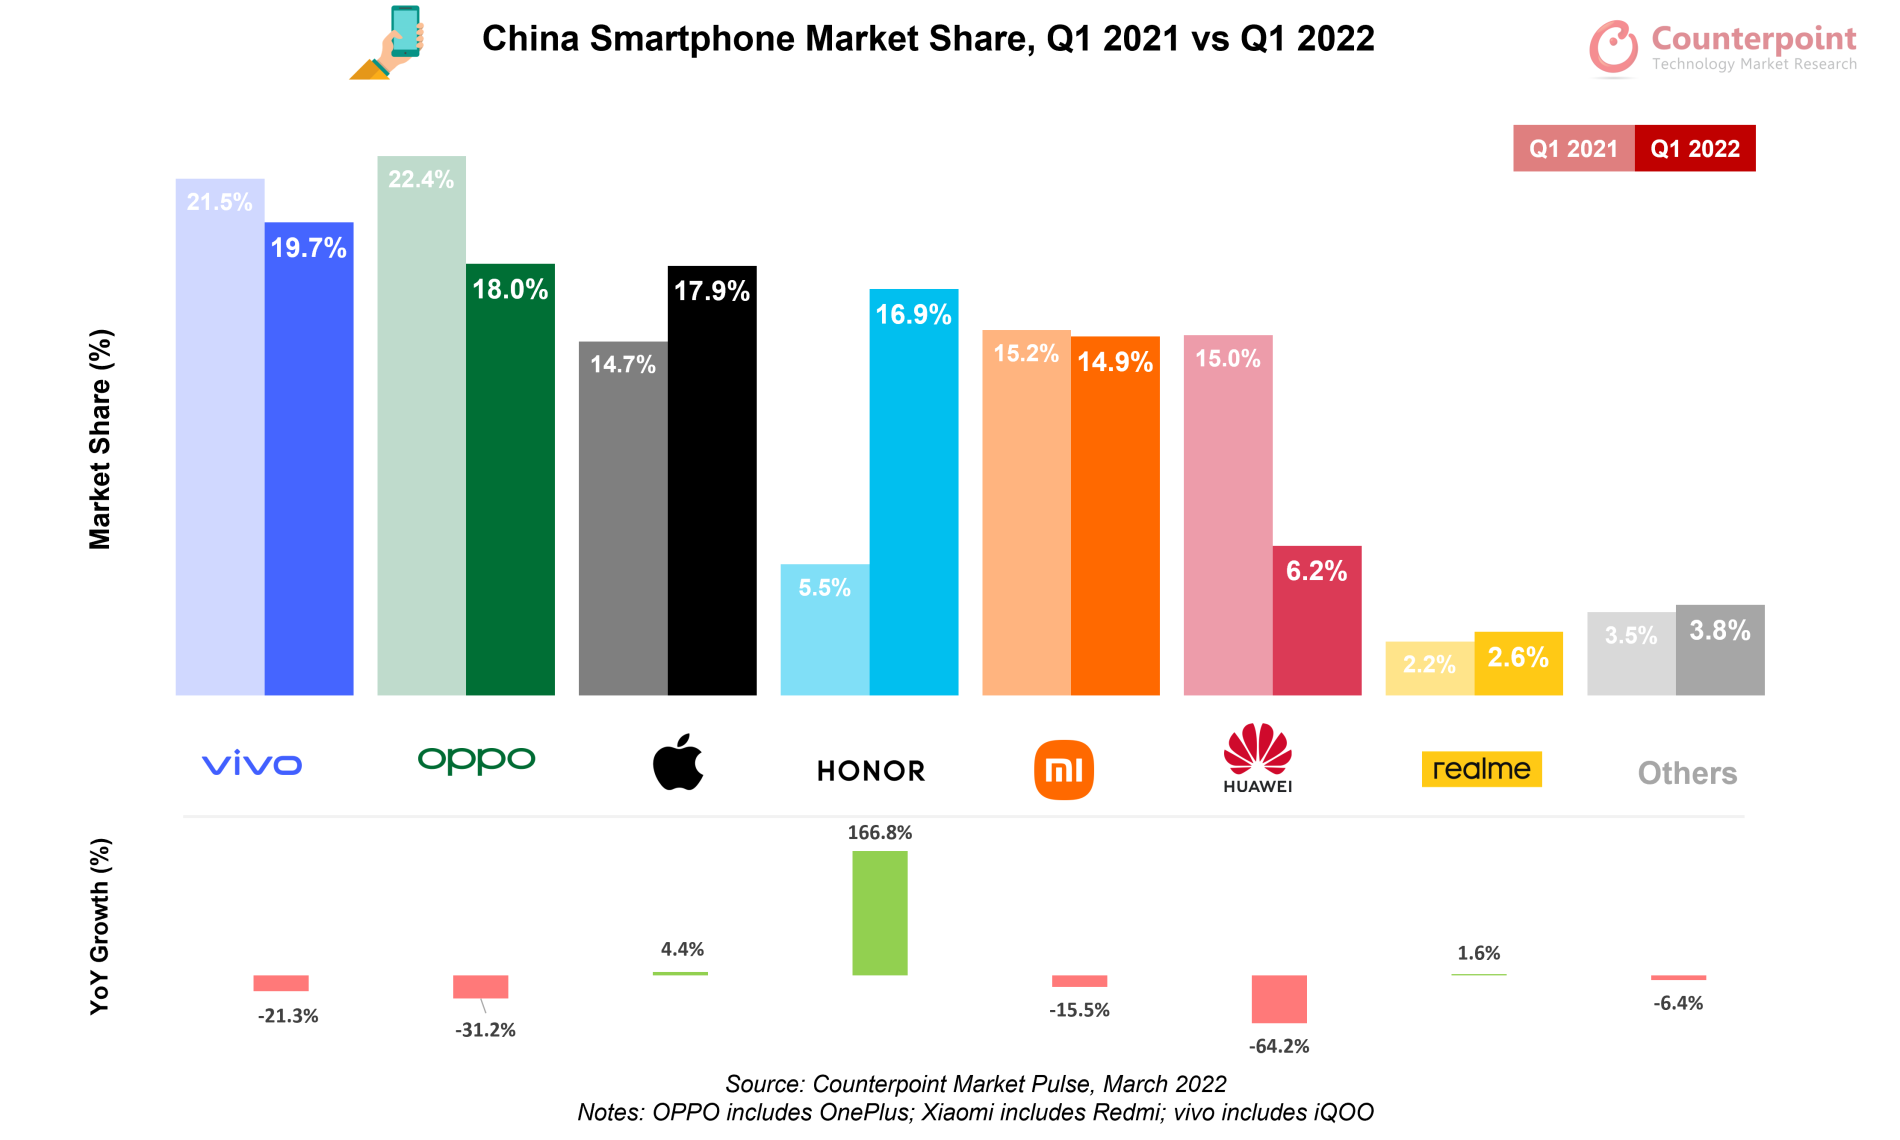 vivo topped China's smartphone market in Q1 2022, according to Counterpoint